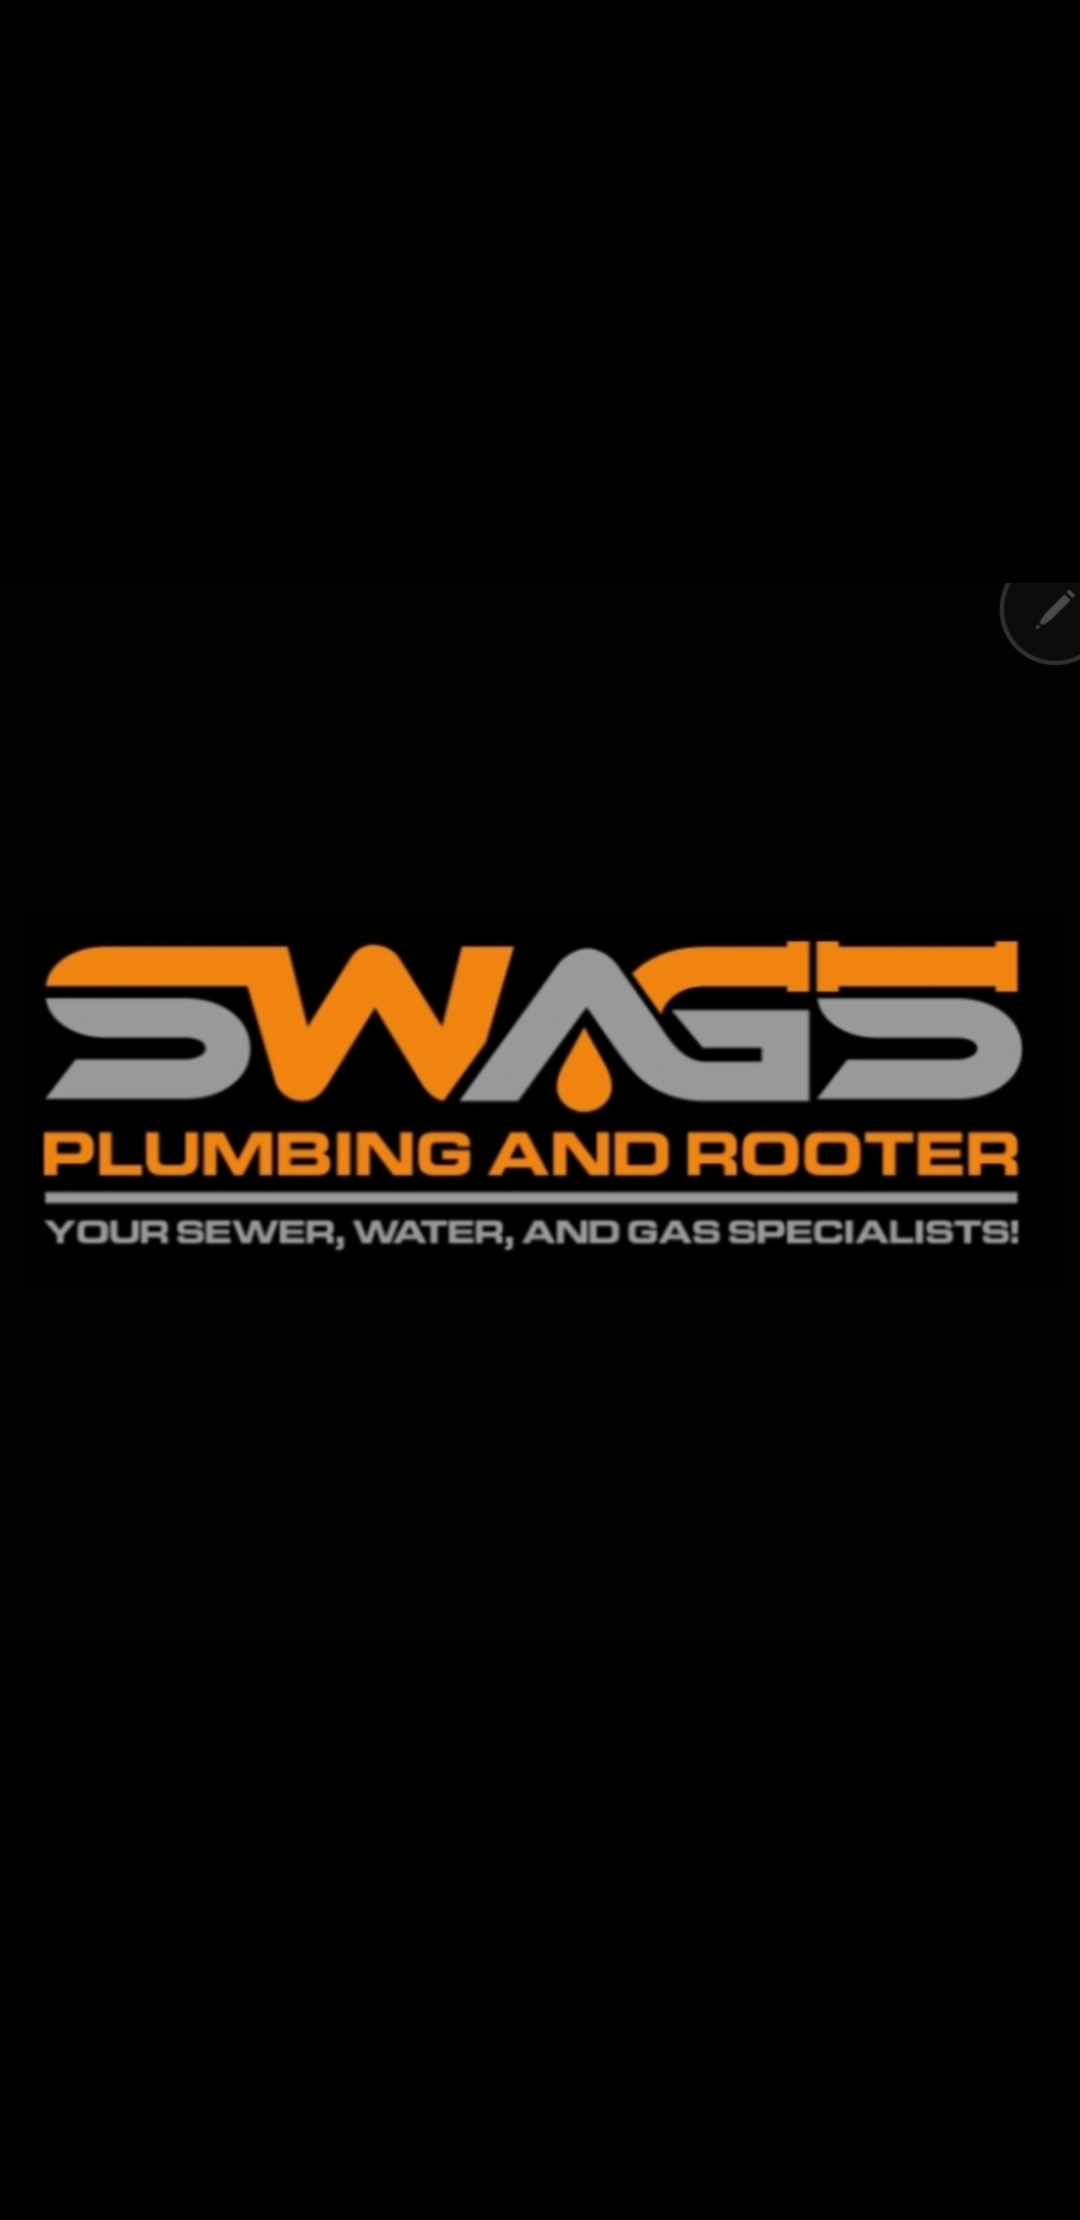 SWAGS Plumbing and Rooter Logo